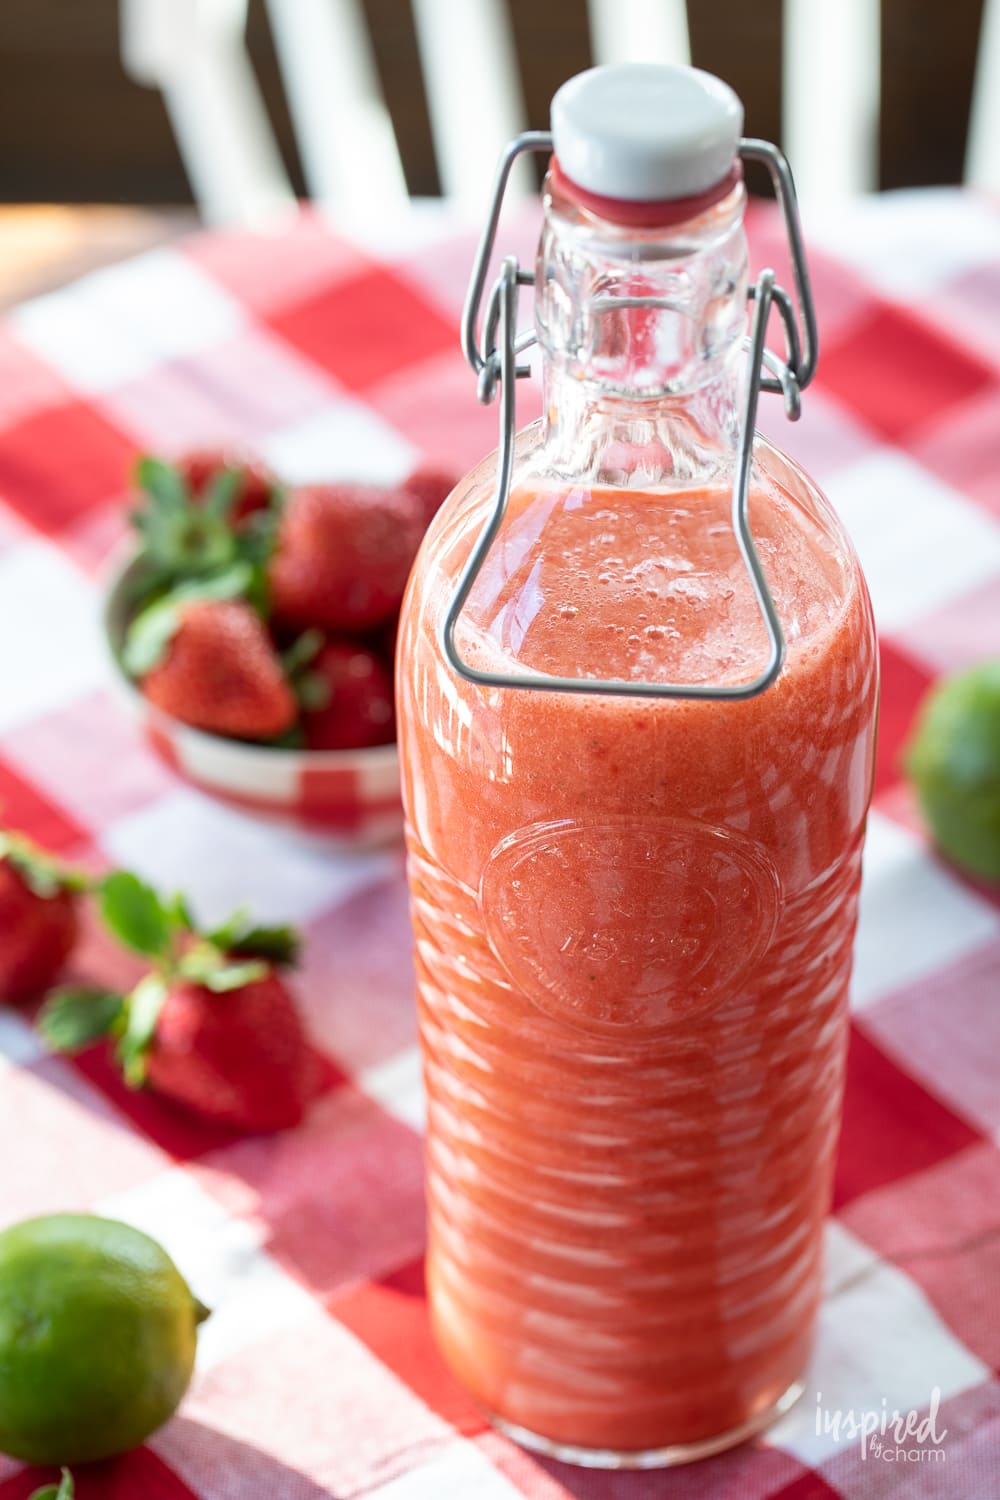 Homemade Strawberry Margarita mix in a bottle with strawberries and limes.